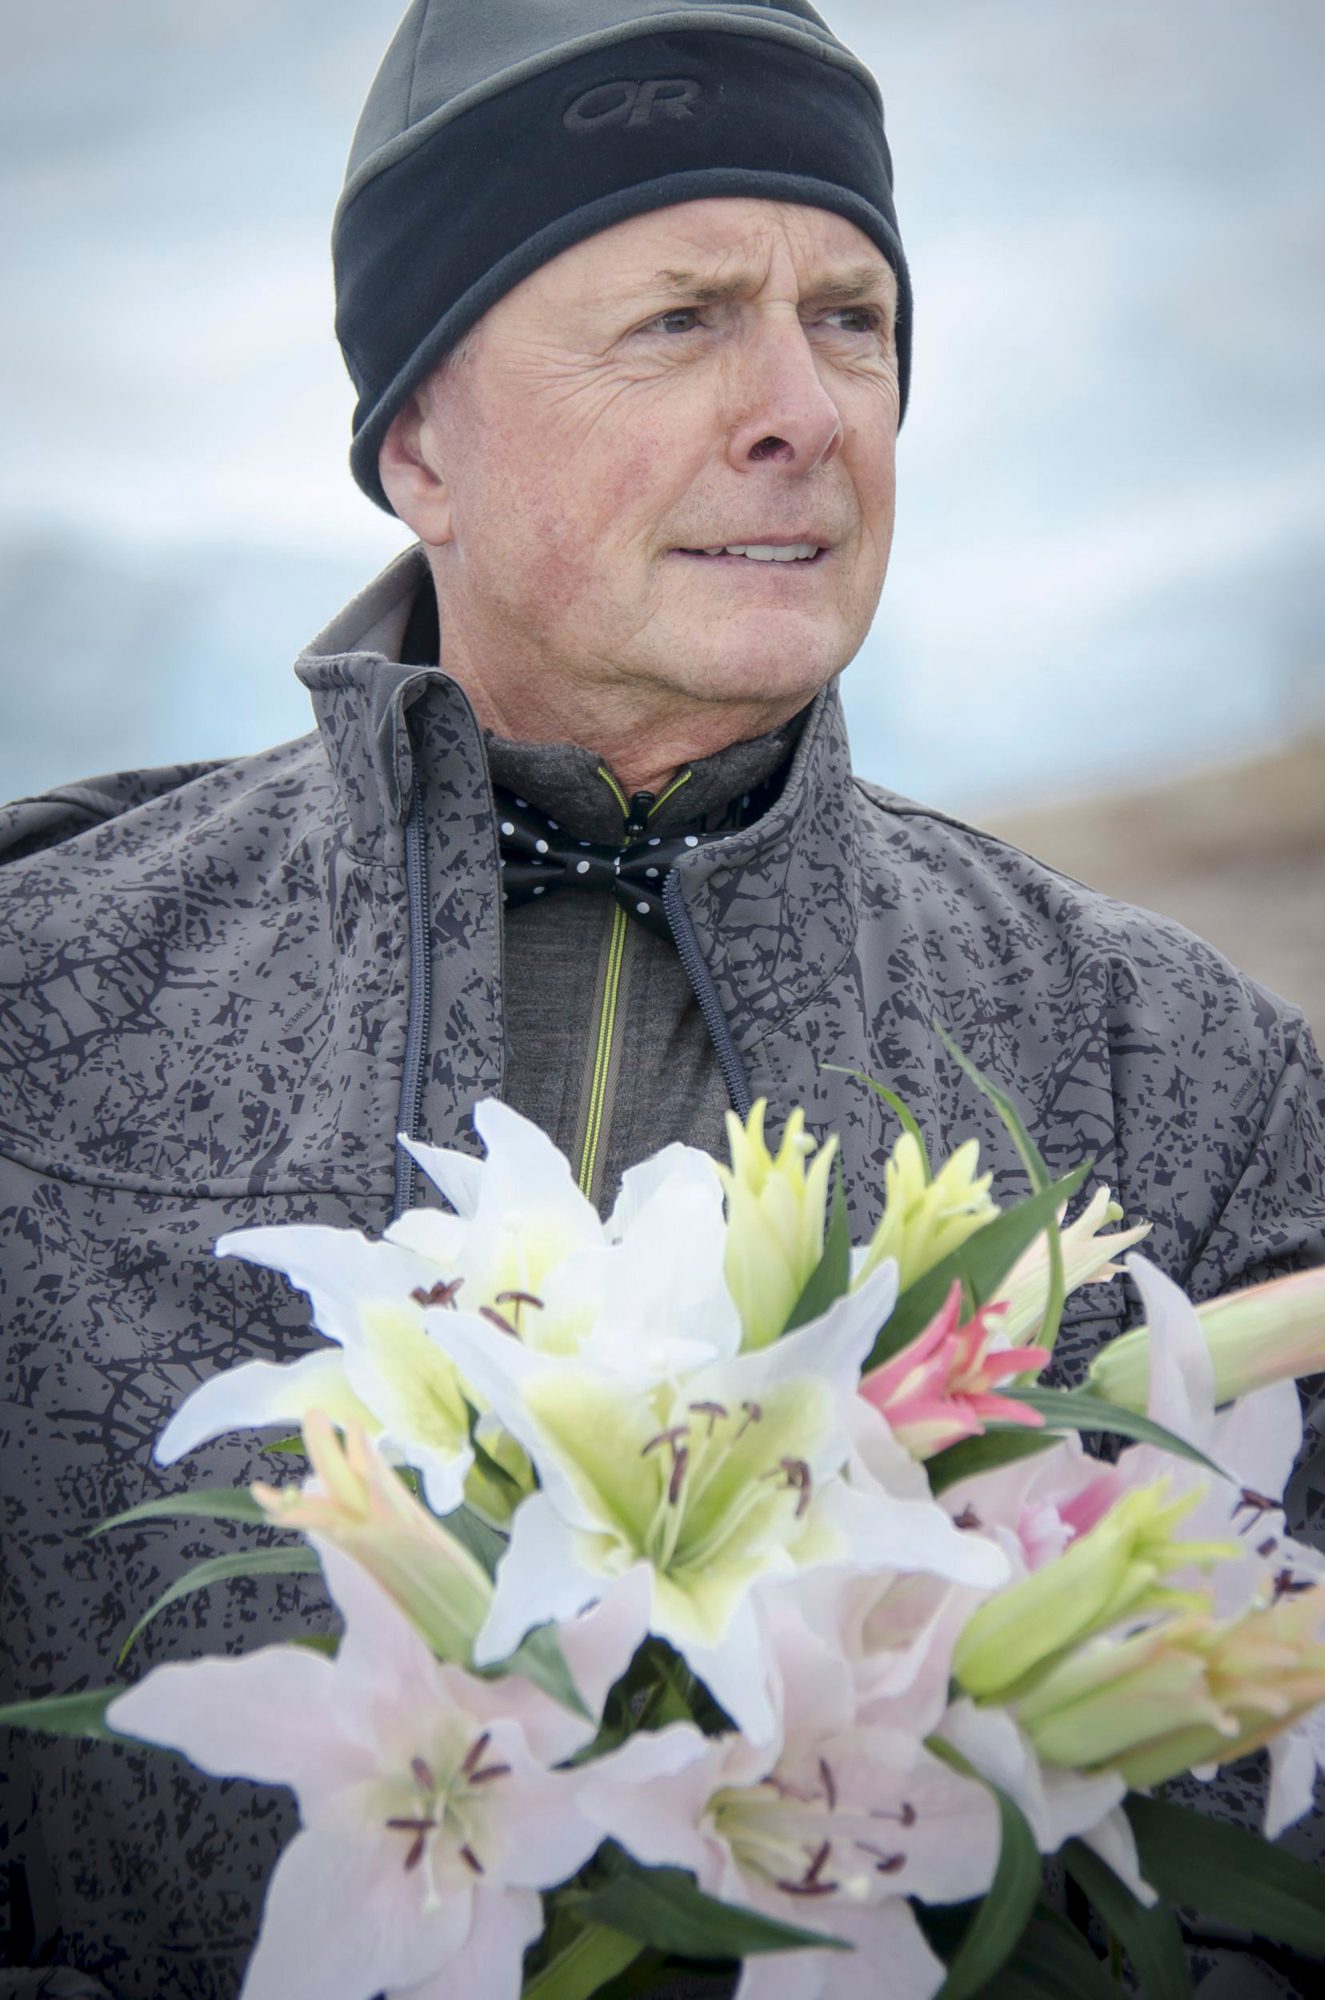 Art Wolfe managed to make his own boquet out of silk flowers.